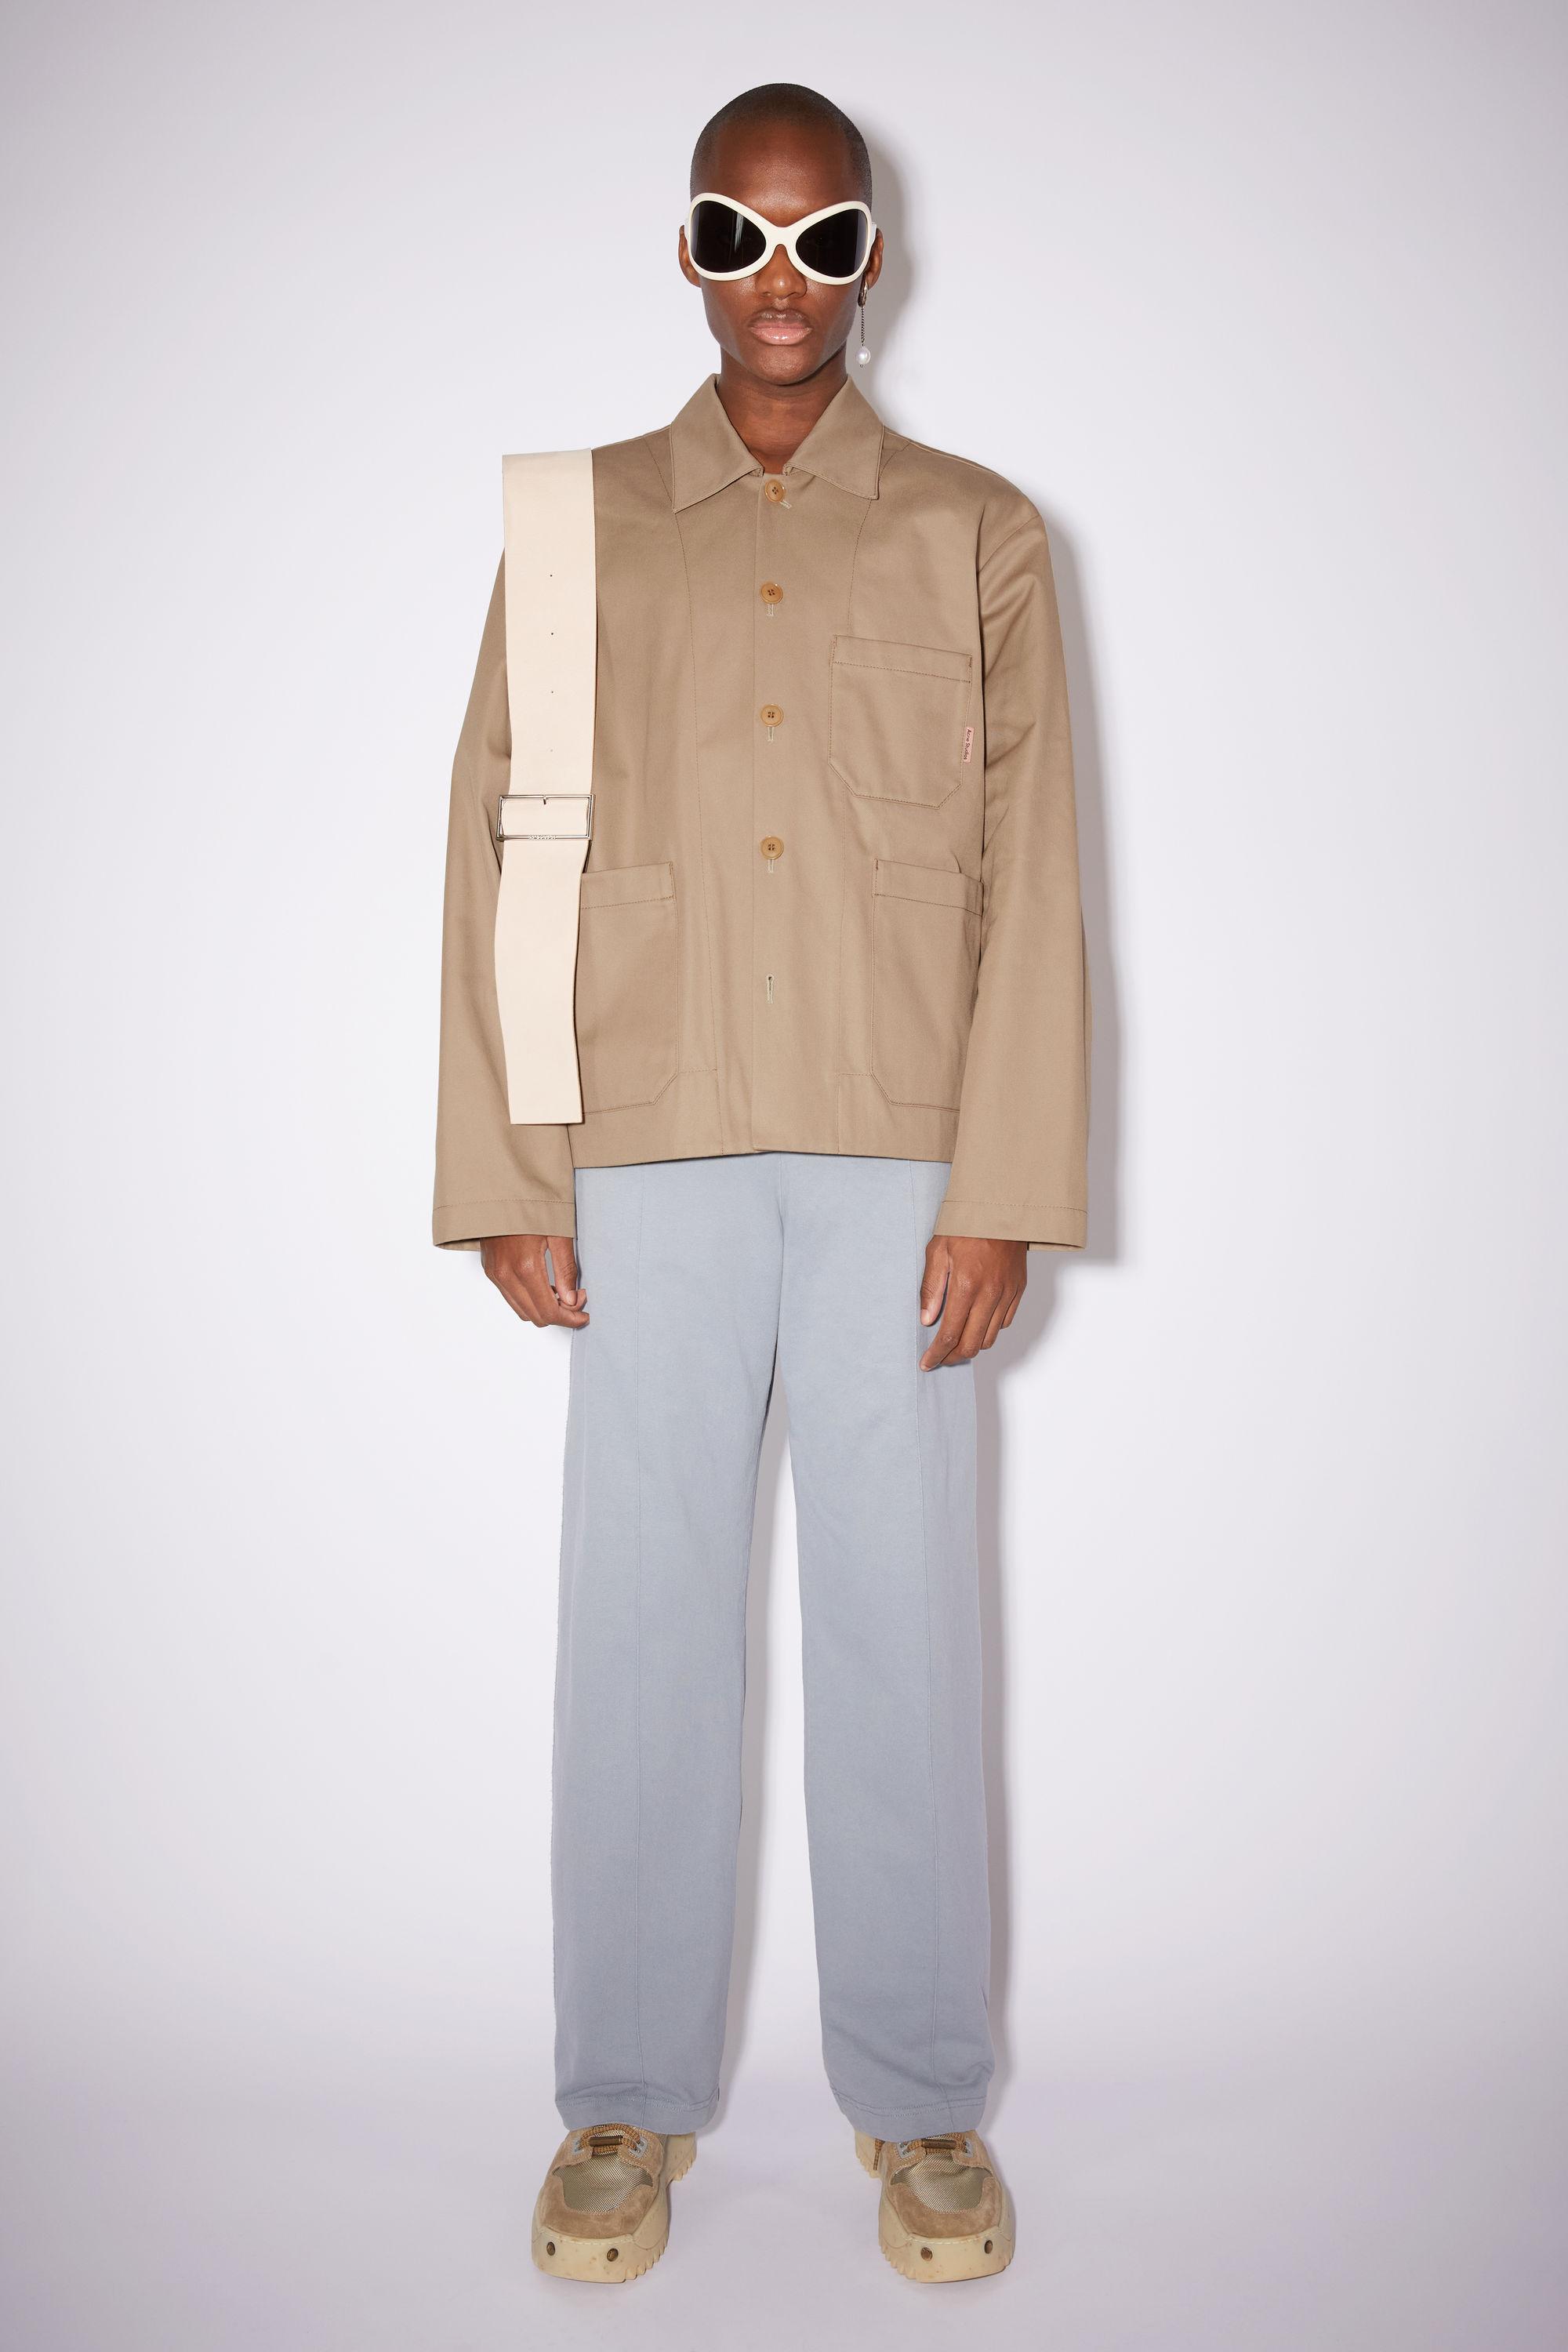 Acne Studios Cotton Twill Jacket in Beige (Natural) for Men | Lyst